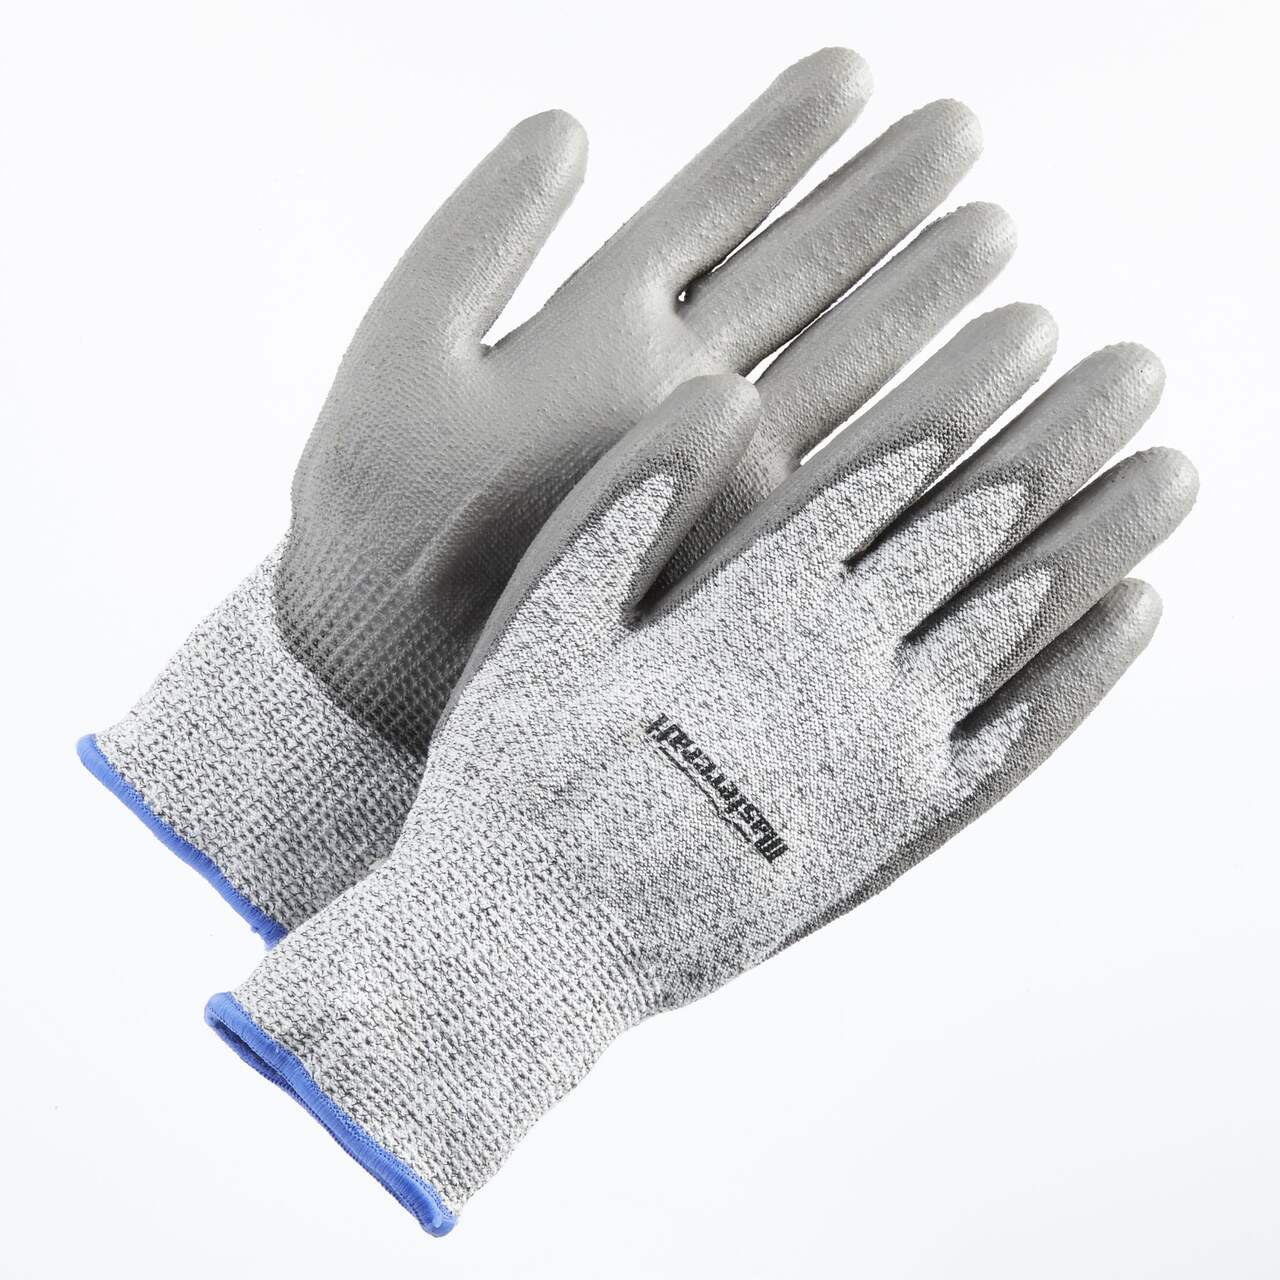 NoCry Heavy Duty Cut Resistant Work Gloves — Durable Cut Resistant Gloves  with Grip Dots, Level 5 Cutting Gloves for Chefs, Perfect Wood Carving